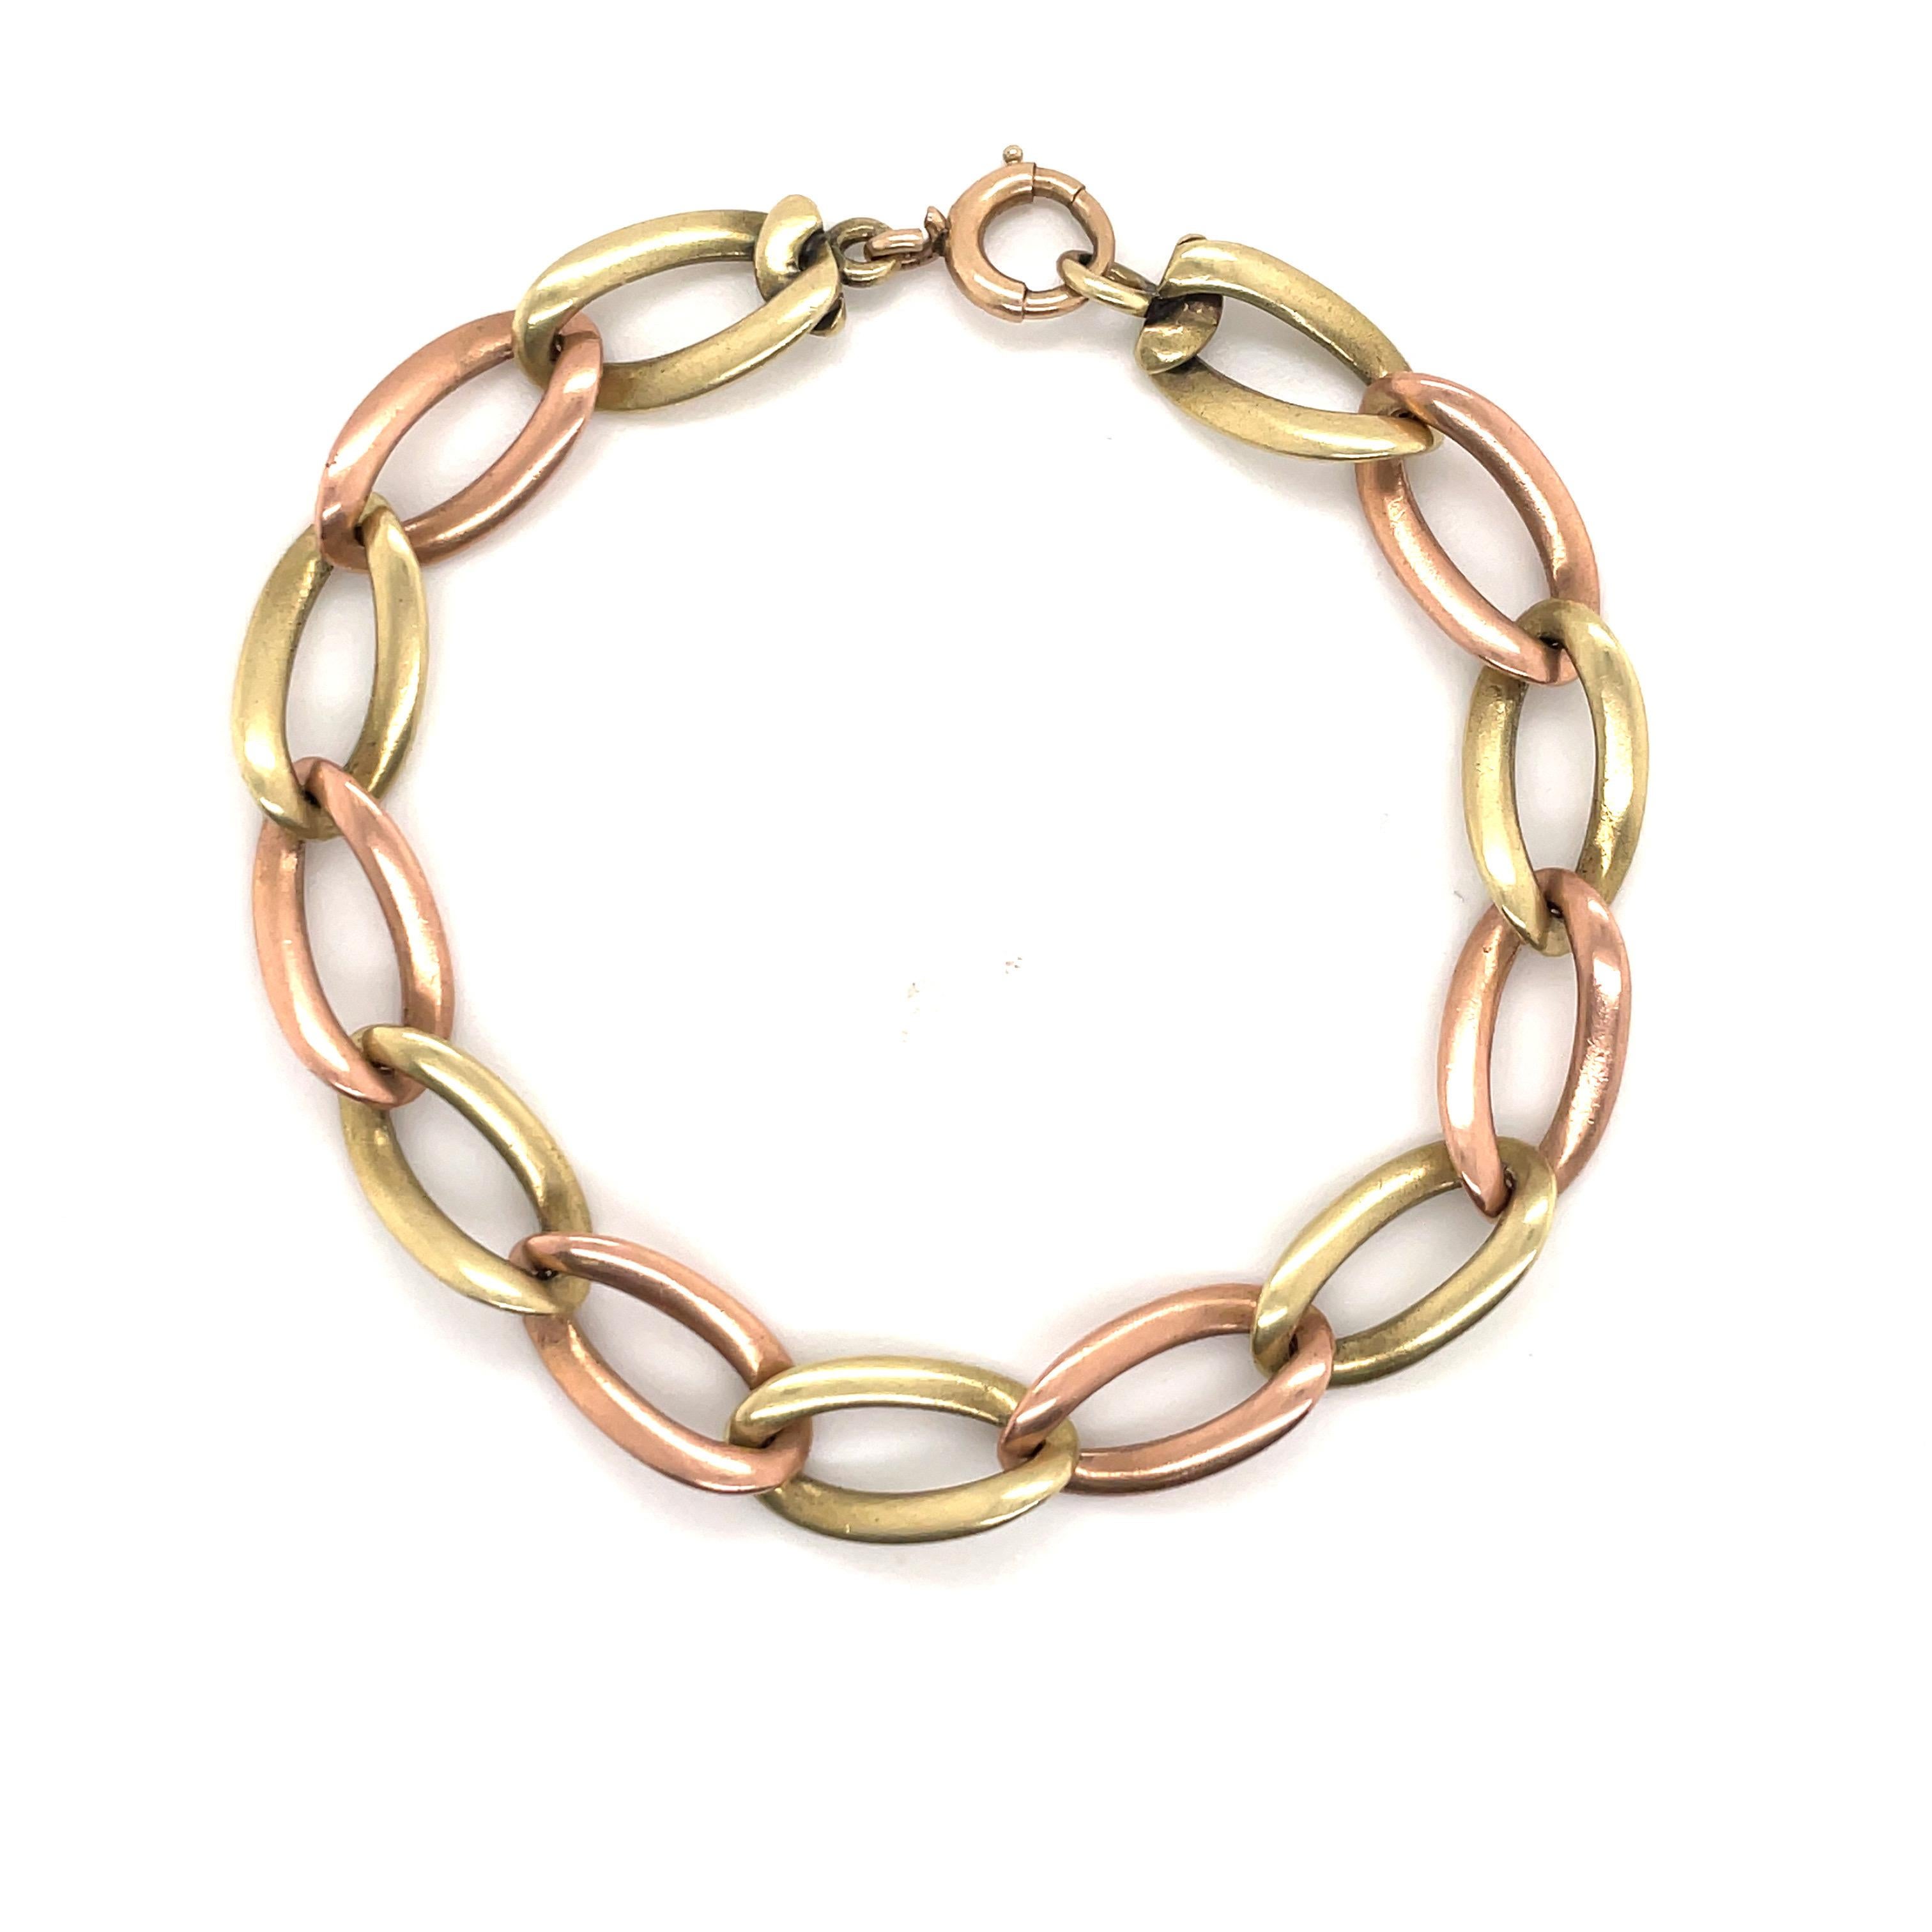 14 Karat Yellow & Rose Gold bracelet featuring 13 twisted curb links weighing 19.2 grams.
Great for laying! 